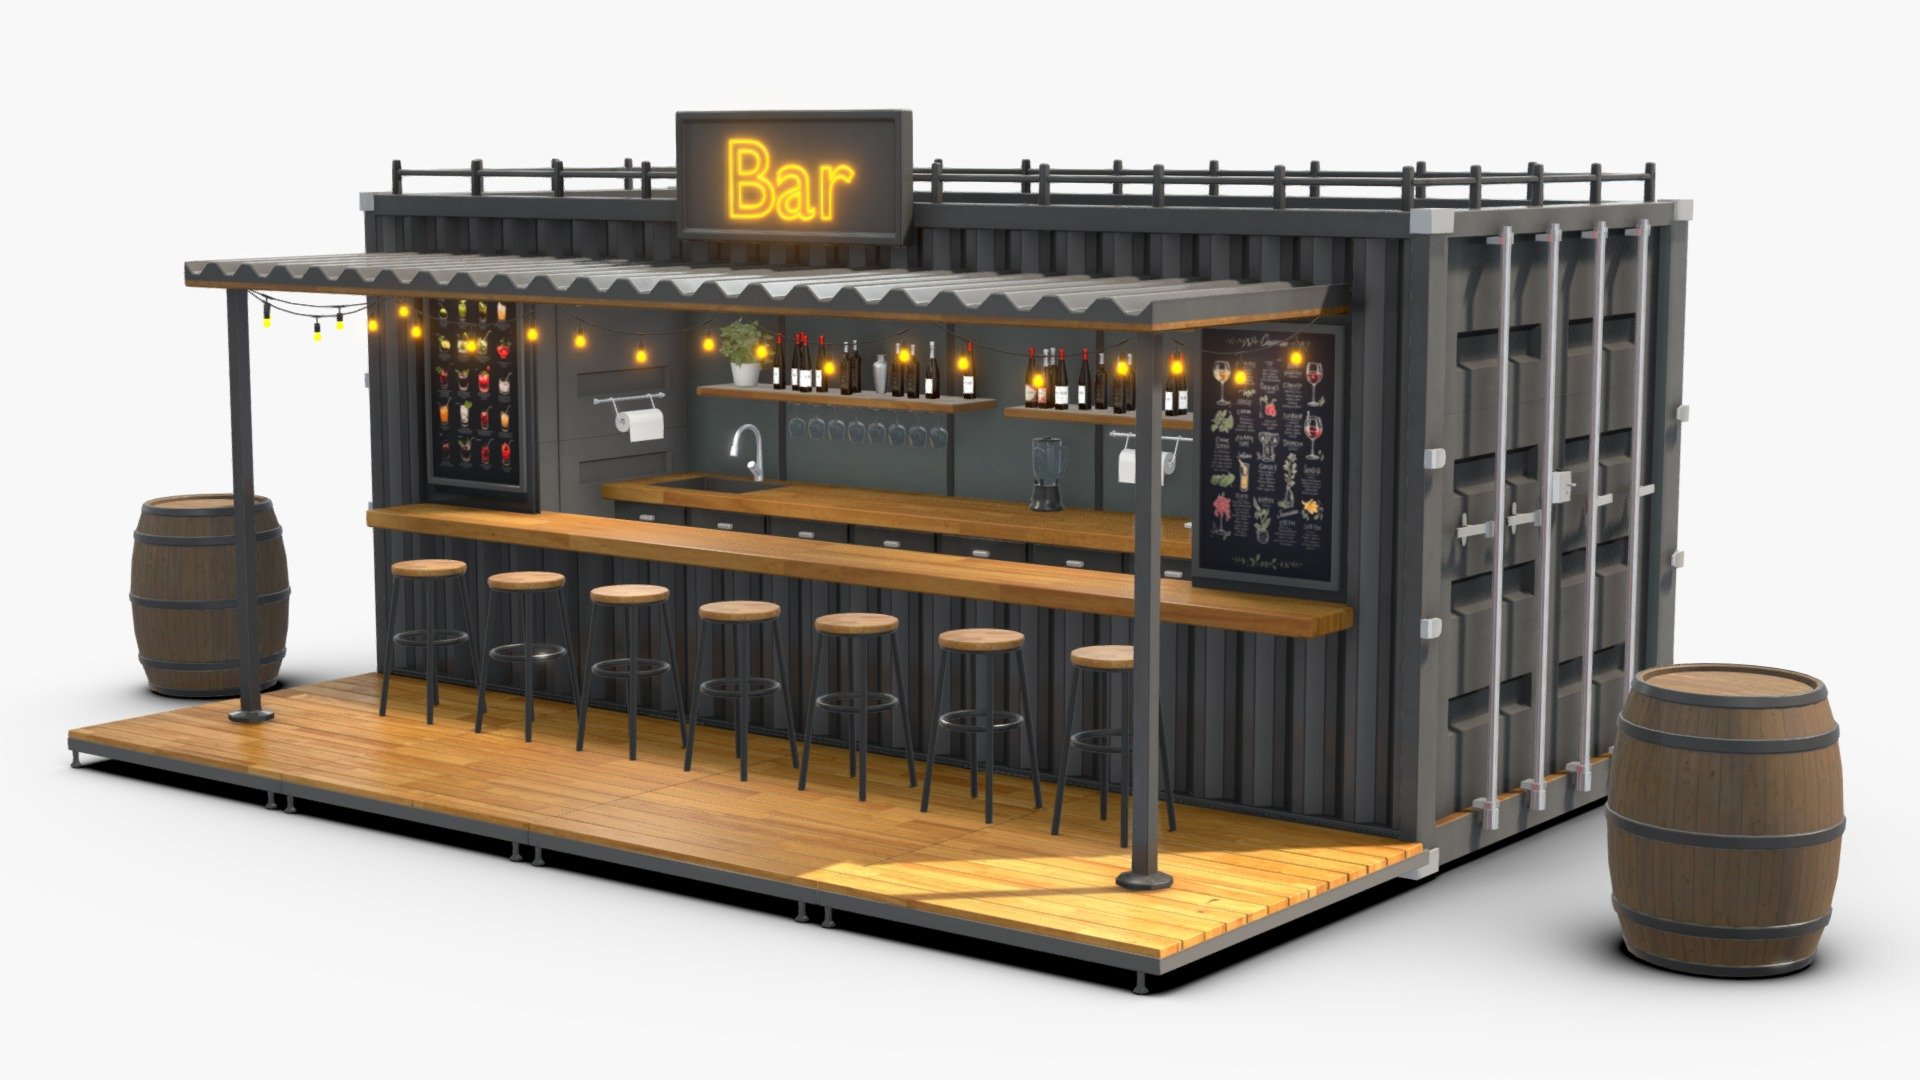 Unique Shipping Container Bar! Combining industrial chic with practical functionality, this 3D model captures the growing trend of upcycling containers into modern, usable spaces. The bar is crafted from a repurposed shipping container, outfitted with a sleek serving area, cozy seating, and atmospheric lighting, making it perfect for any urban environment, festival, or outdoor event. Its compact size and clever design make it an intriguing addition to any scene, proving that sustainability and style can go hand in hand 3d model